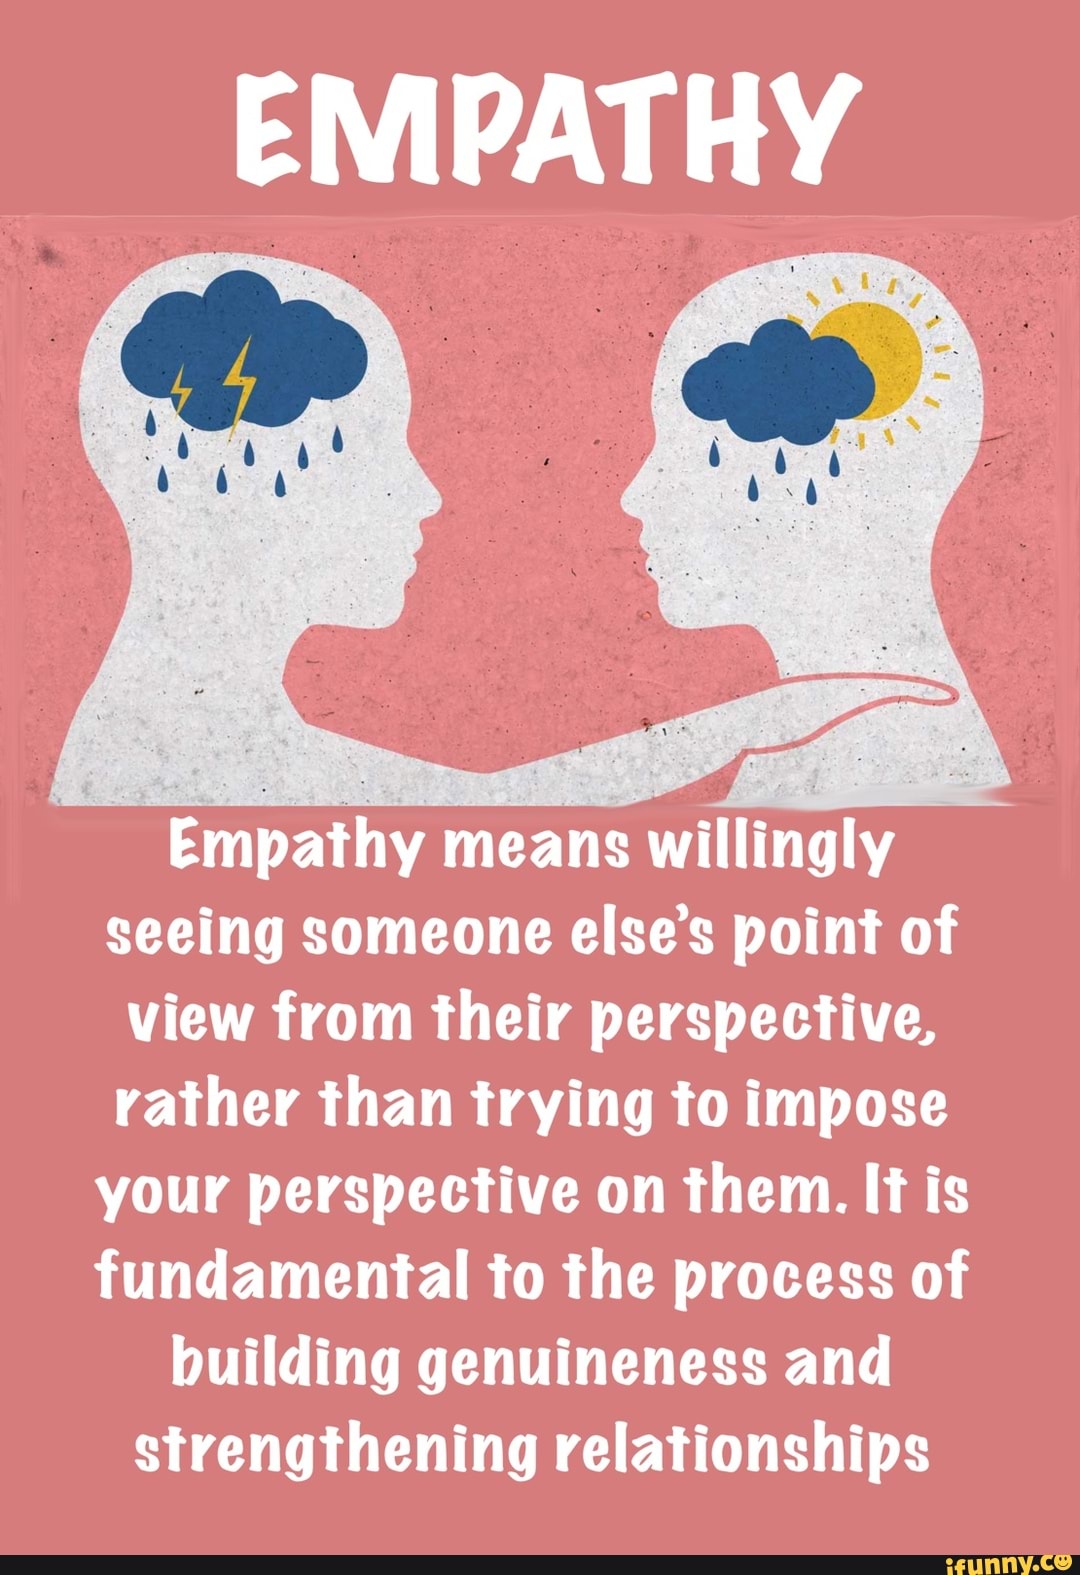 empathy-empathy-means-willingly-seeing-someone-else-s-point-of-view